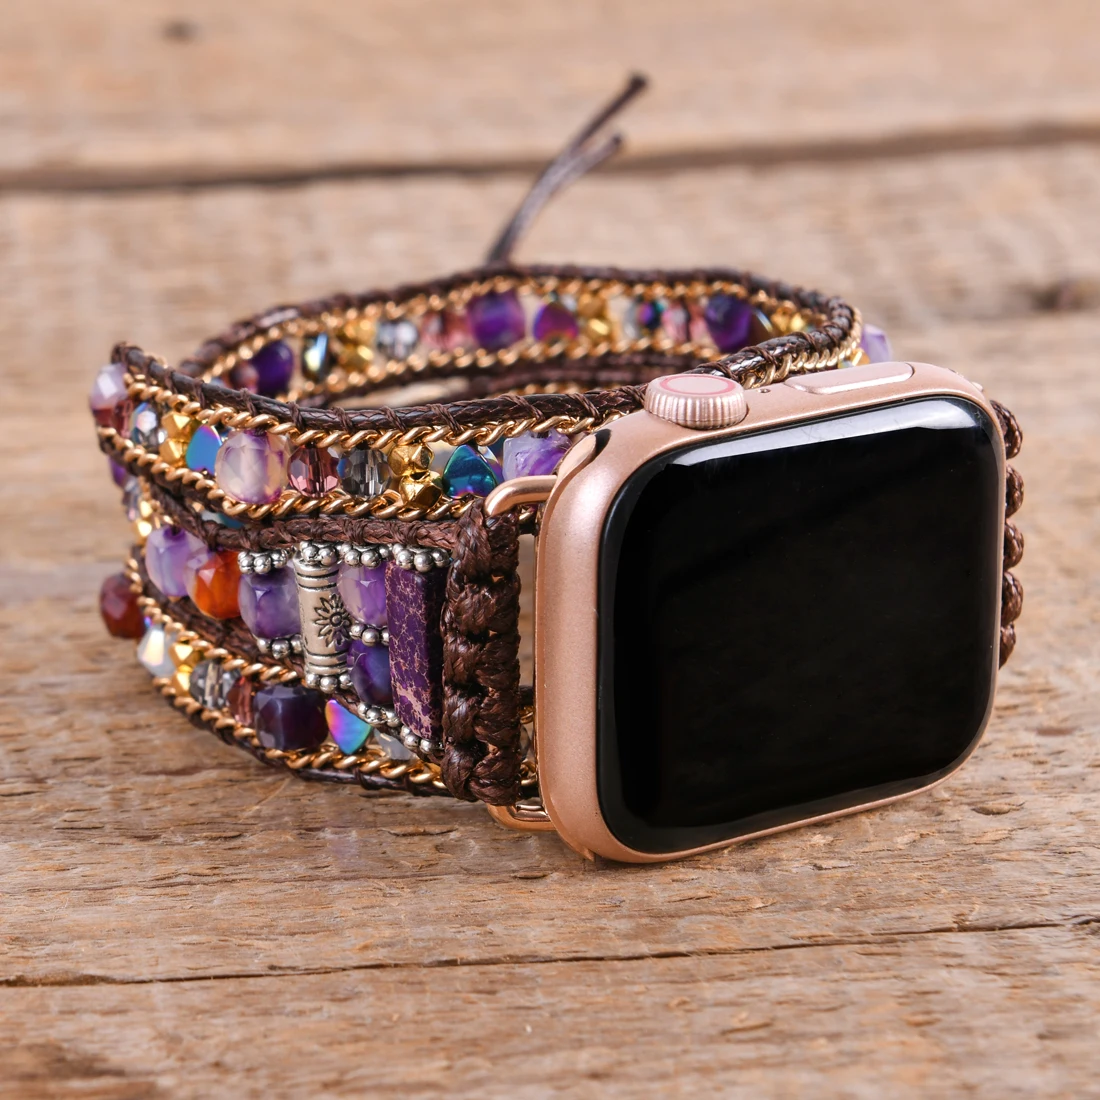 New Ethnic Natural Stone Aagte Imperial Jasper Apple Watch Band Beads Boho 3 Wrap Smartwatch Bracelet For Iwatch Series 1-7